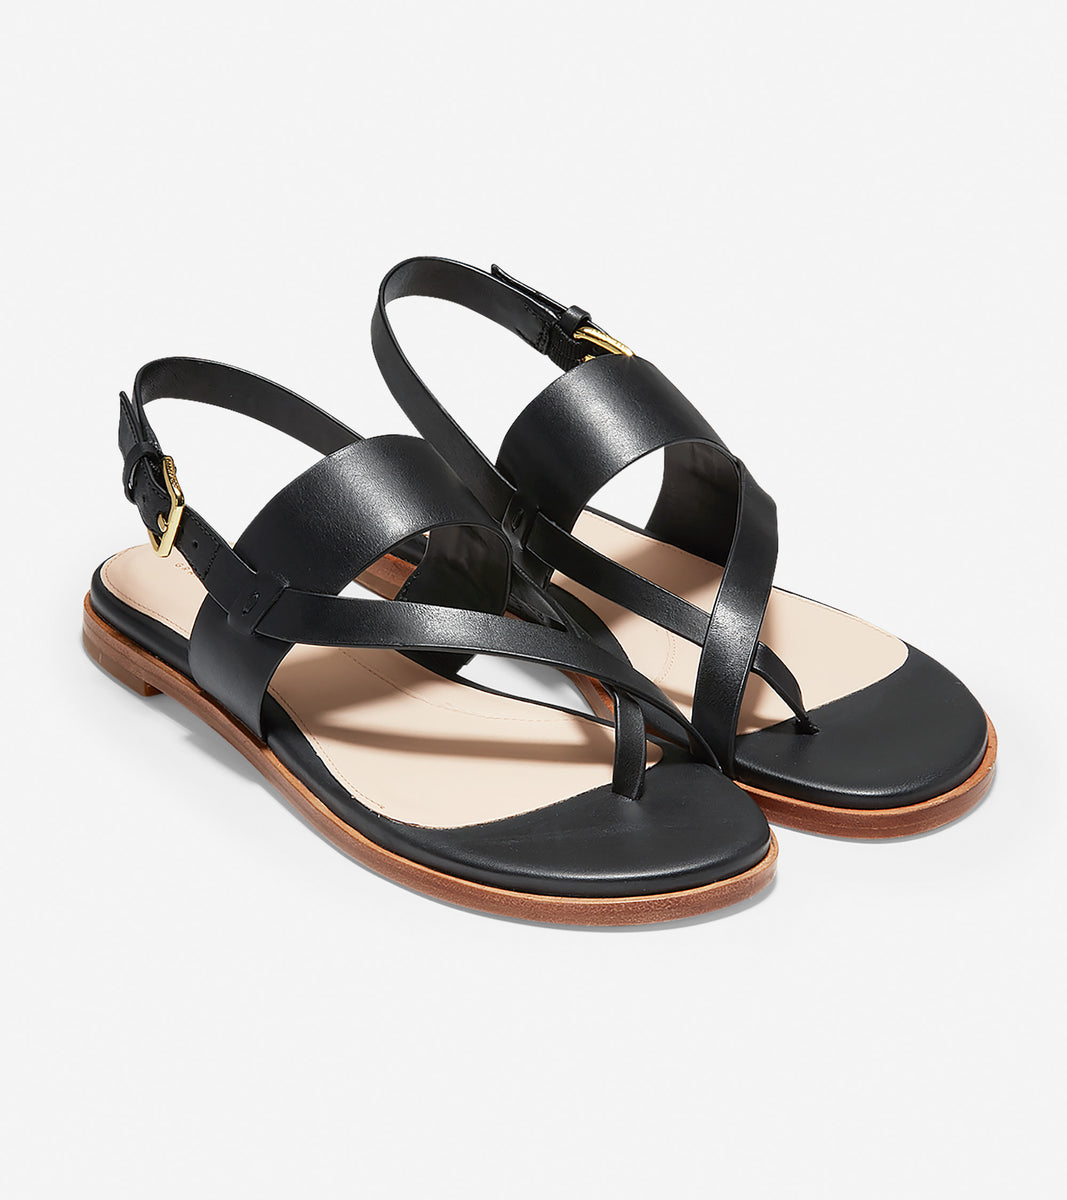 ColeHaan-Anica Thong Sandal-w07409-Black Leather